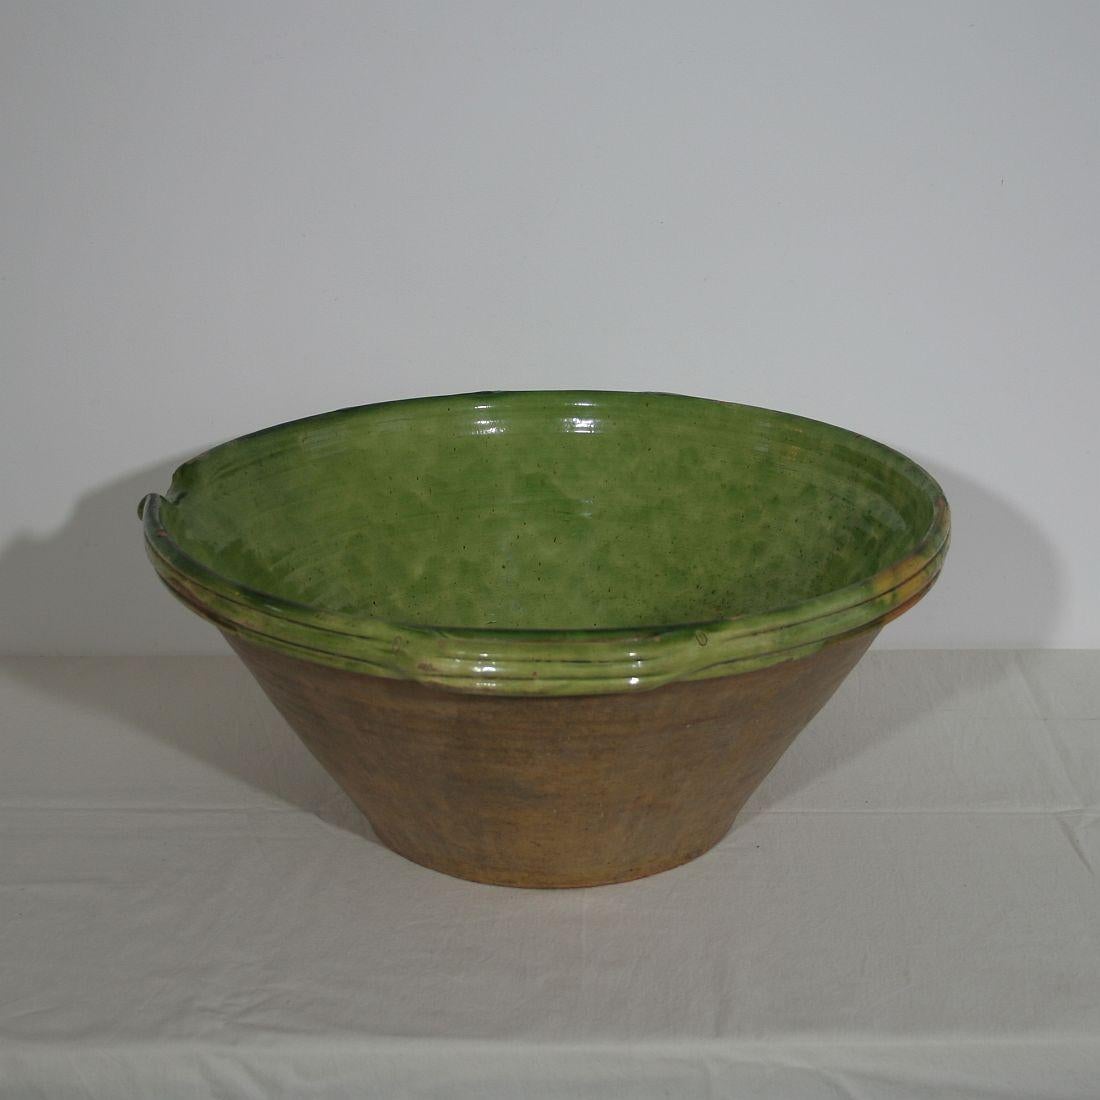 Fabulous antique French large tian (bowl) handmade from terracotta with an exceptional green color. Perfect for as a fruit bowl, as the perfect centerpiece with a bouquet of flowers, or alone as an awesome Country French accent. Tian is a word which